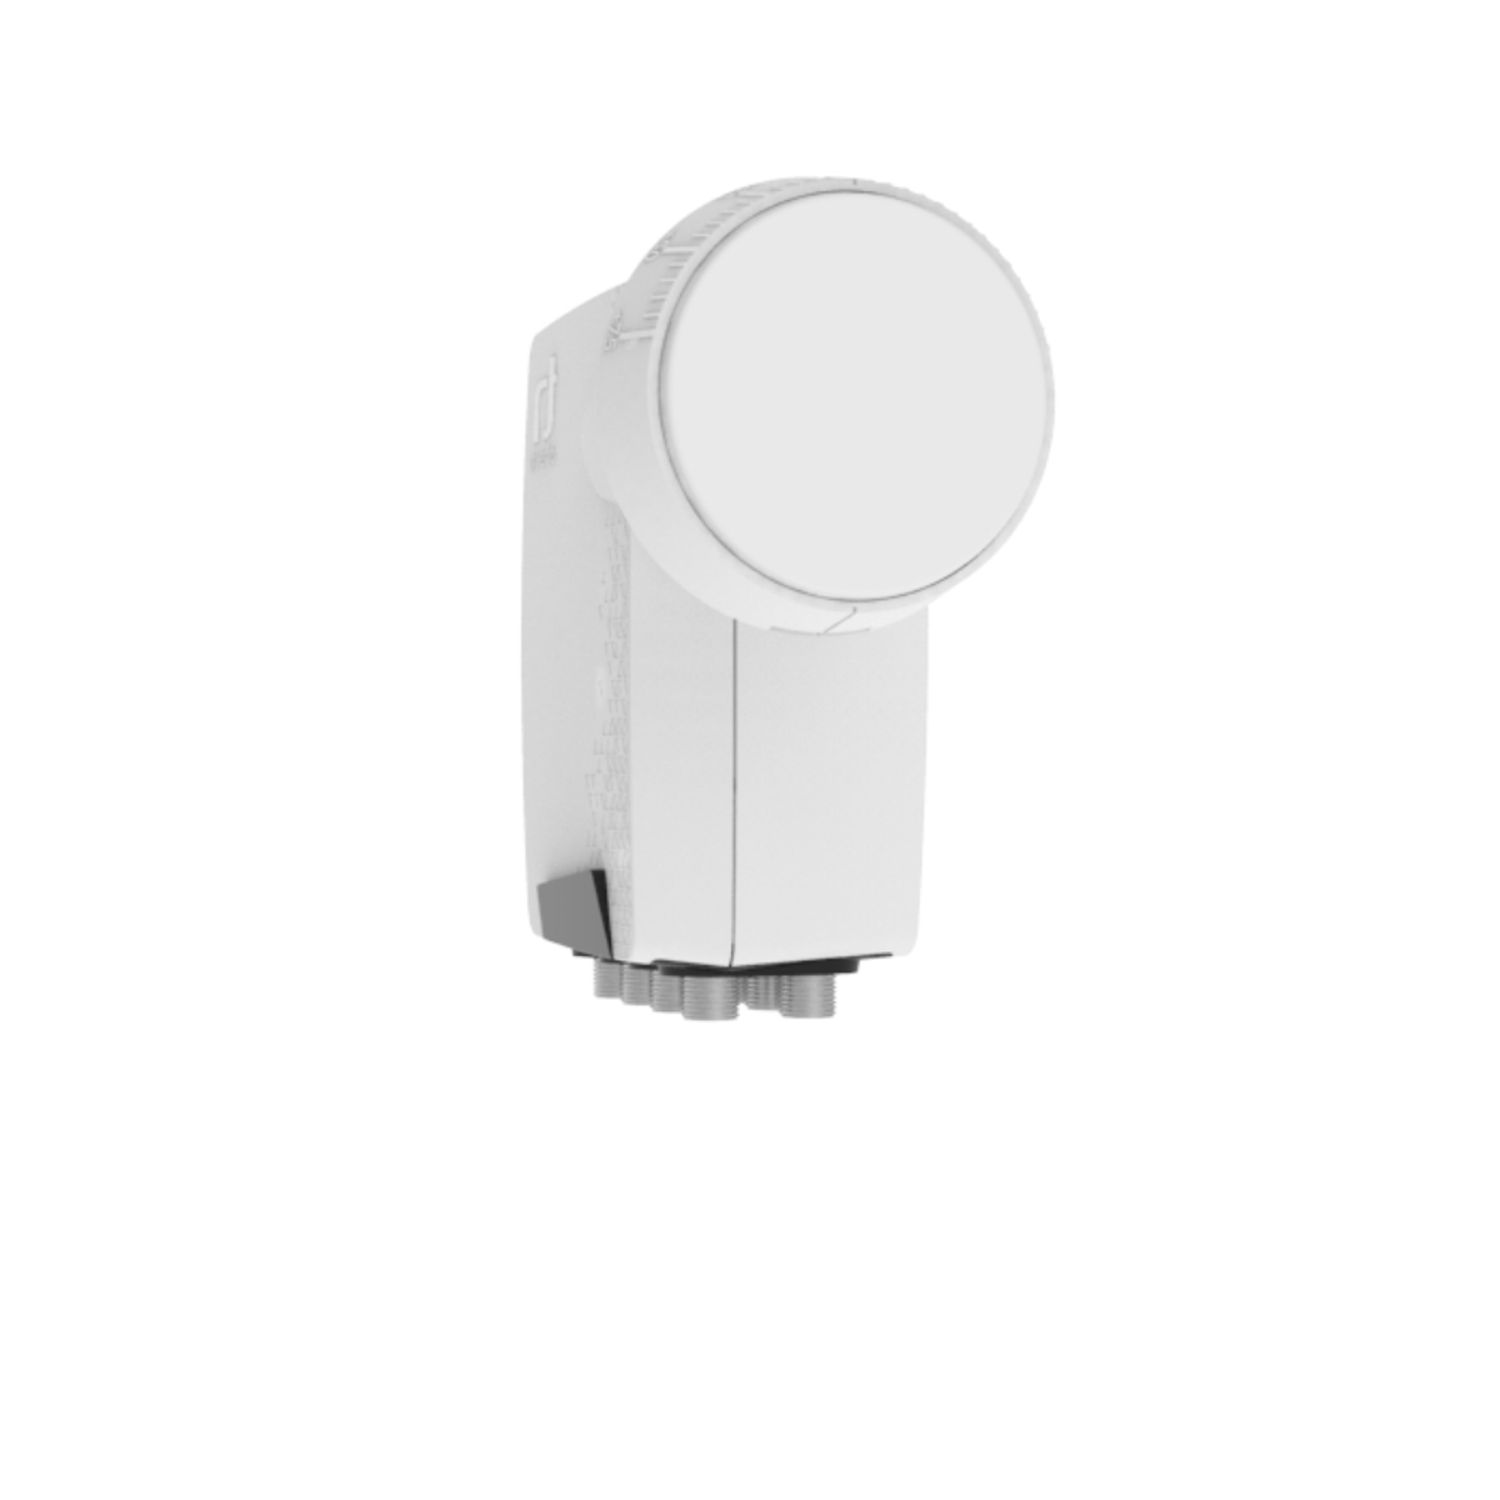 INVERTO Home LNB Octo 40mm Output Pro Universal PLL